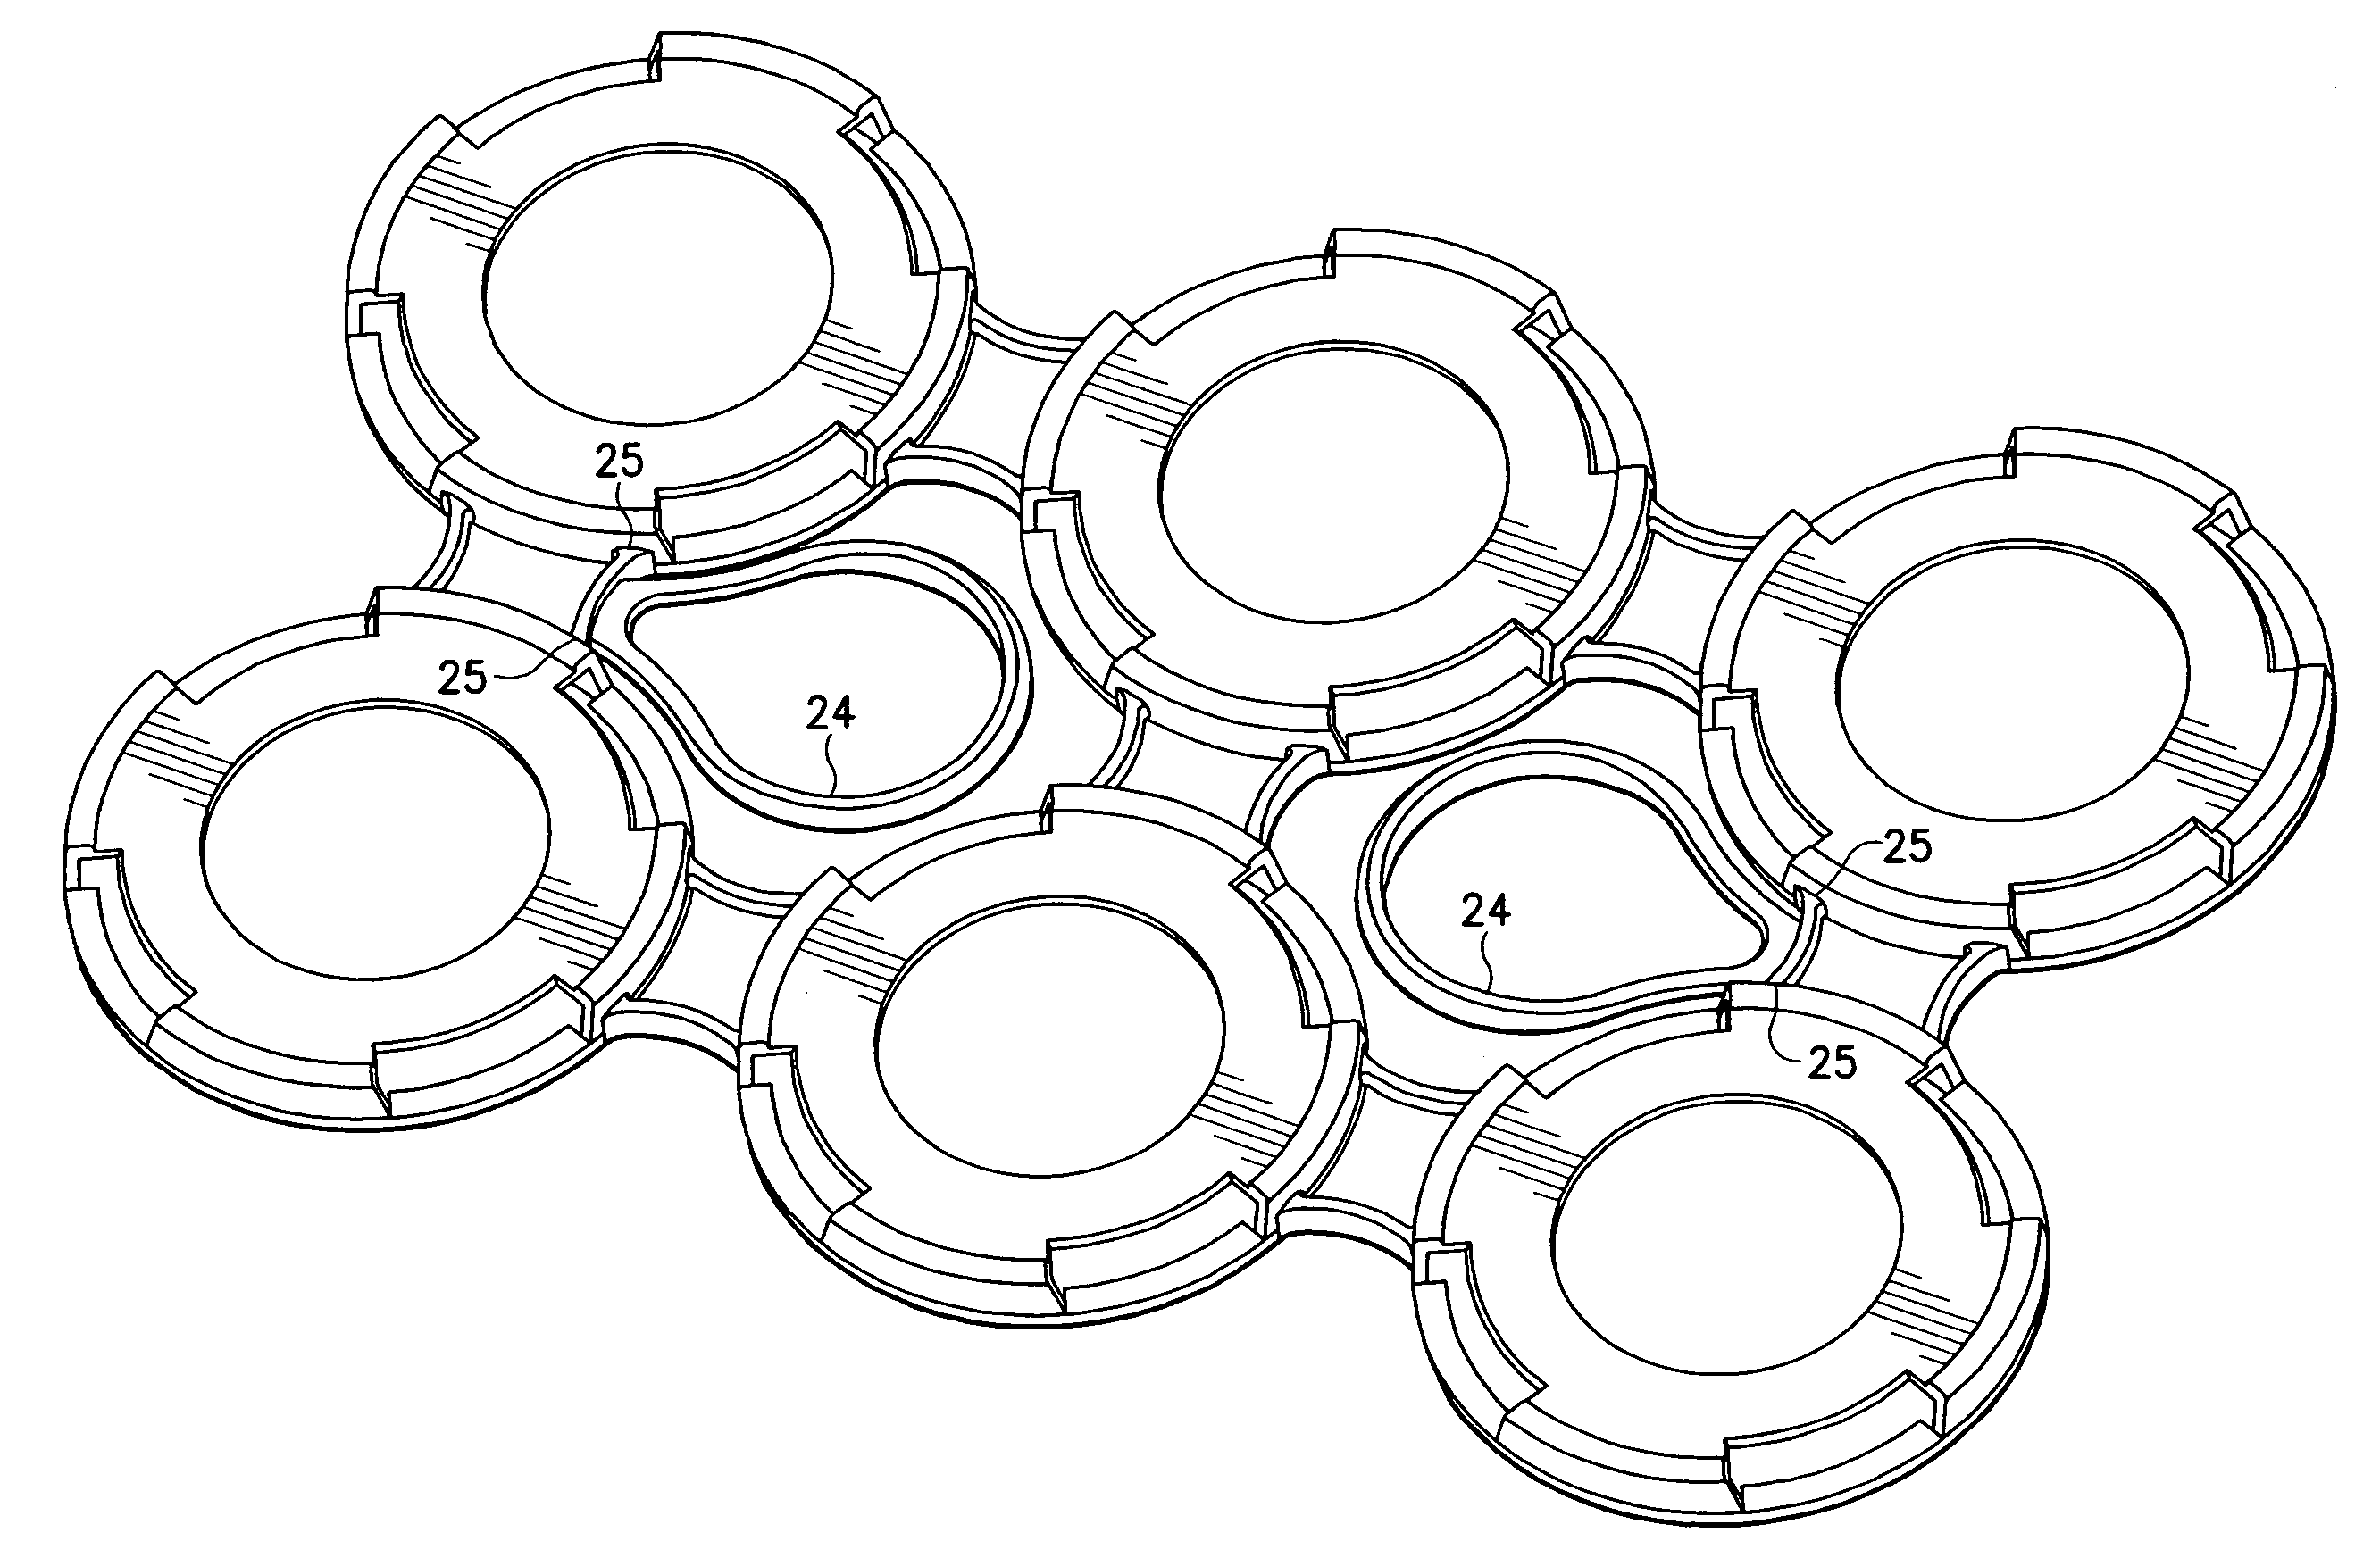 Combination multiple-canister carrier and lip protection device